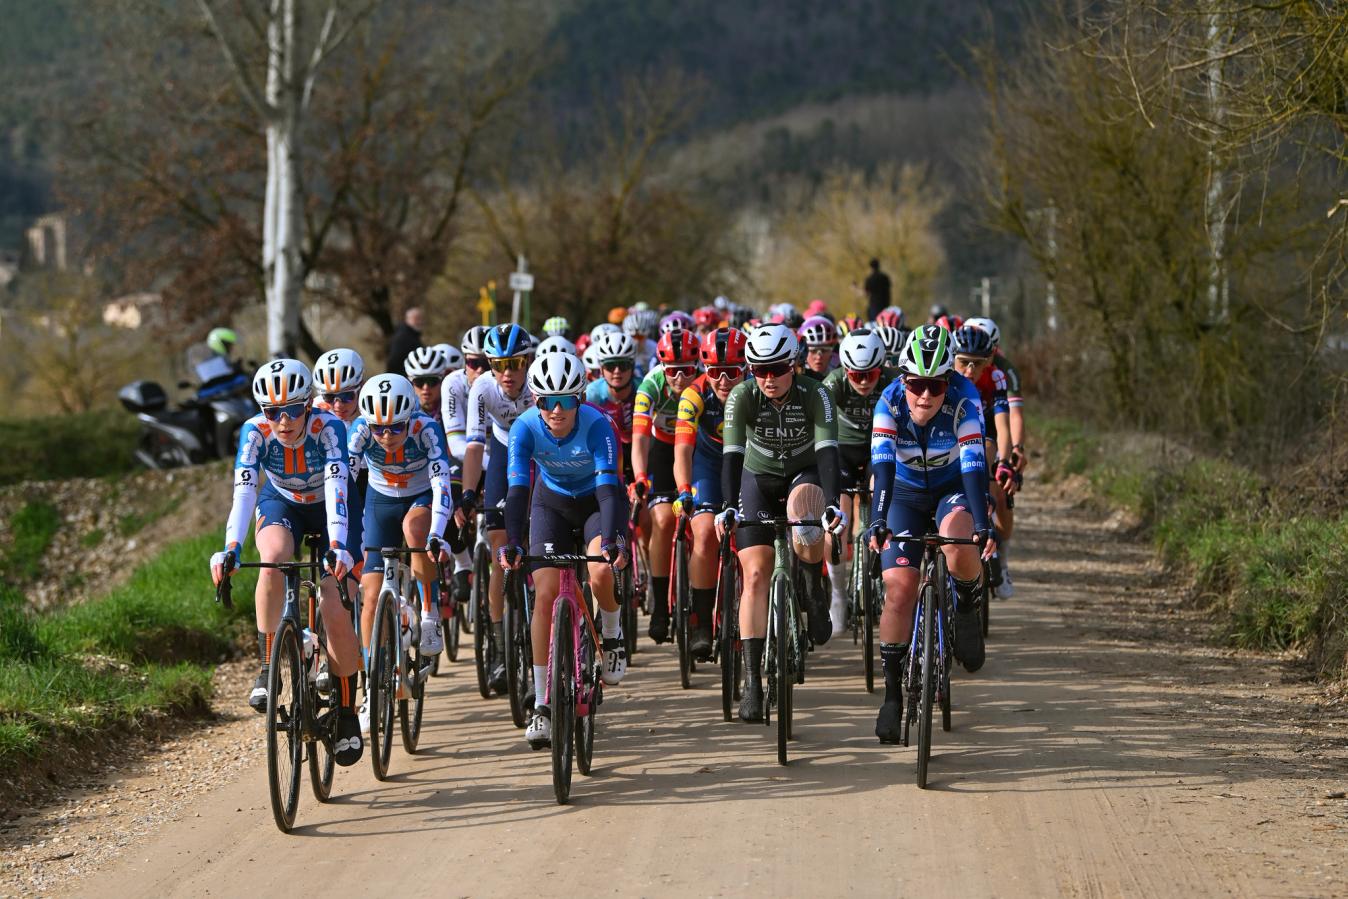 The women's race hit one of the early sectors of gravel